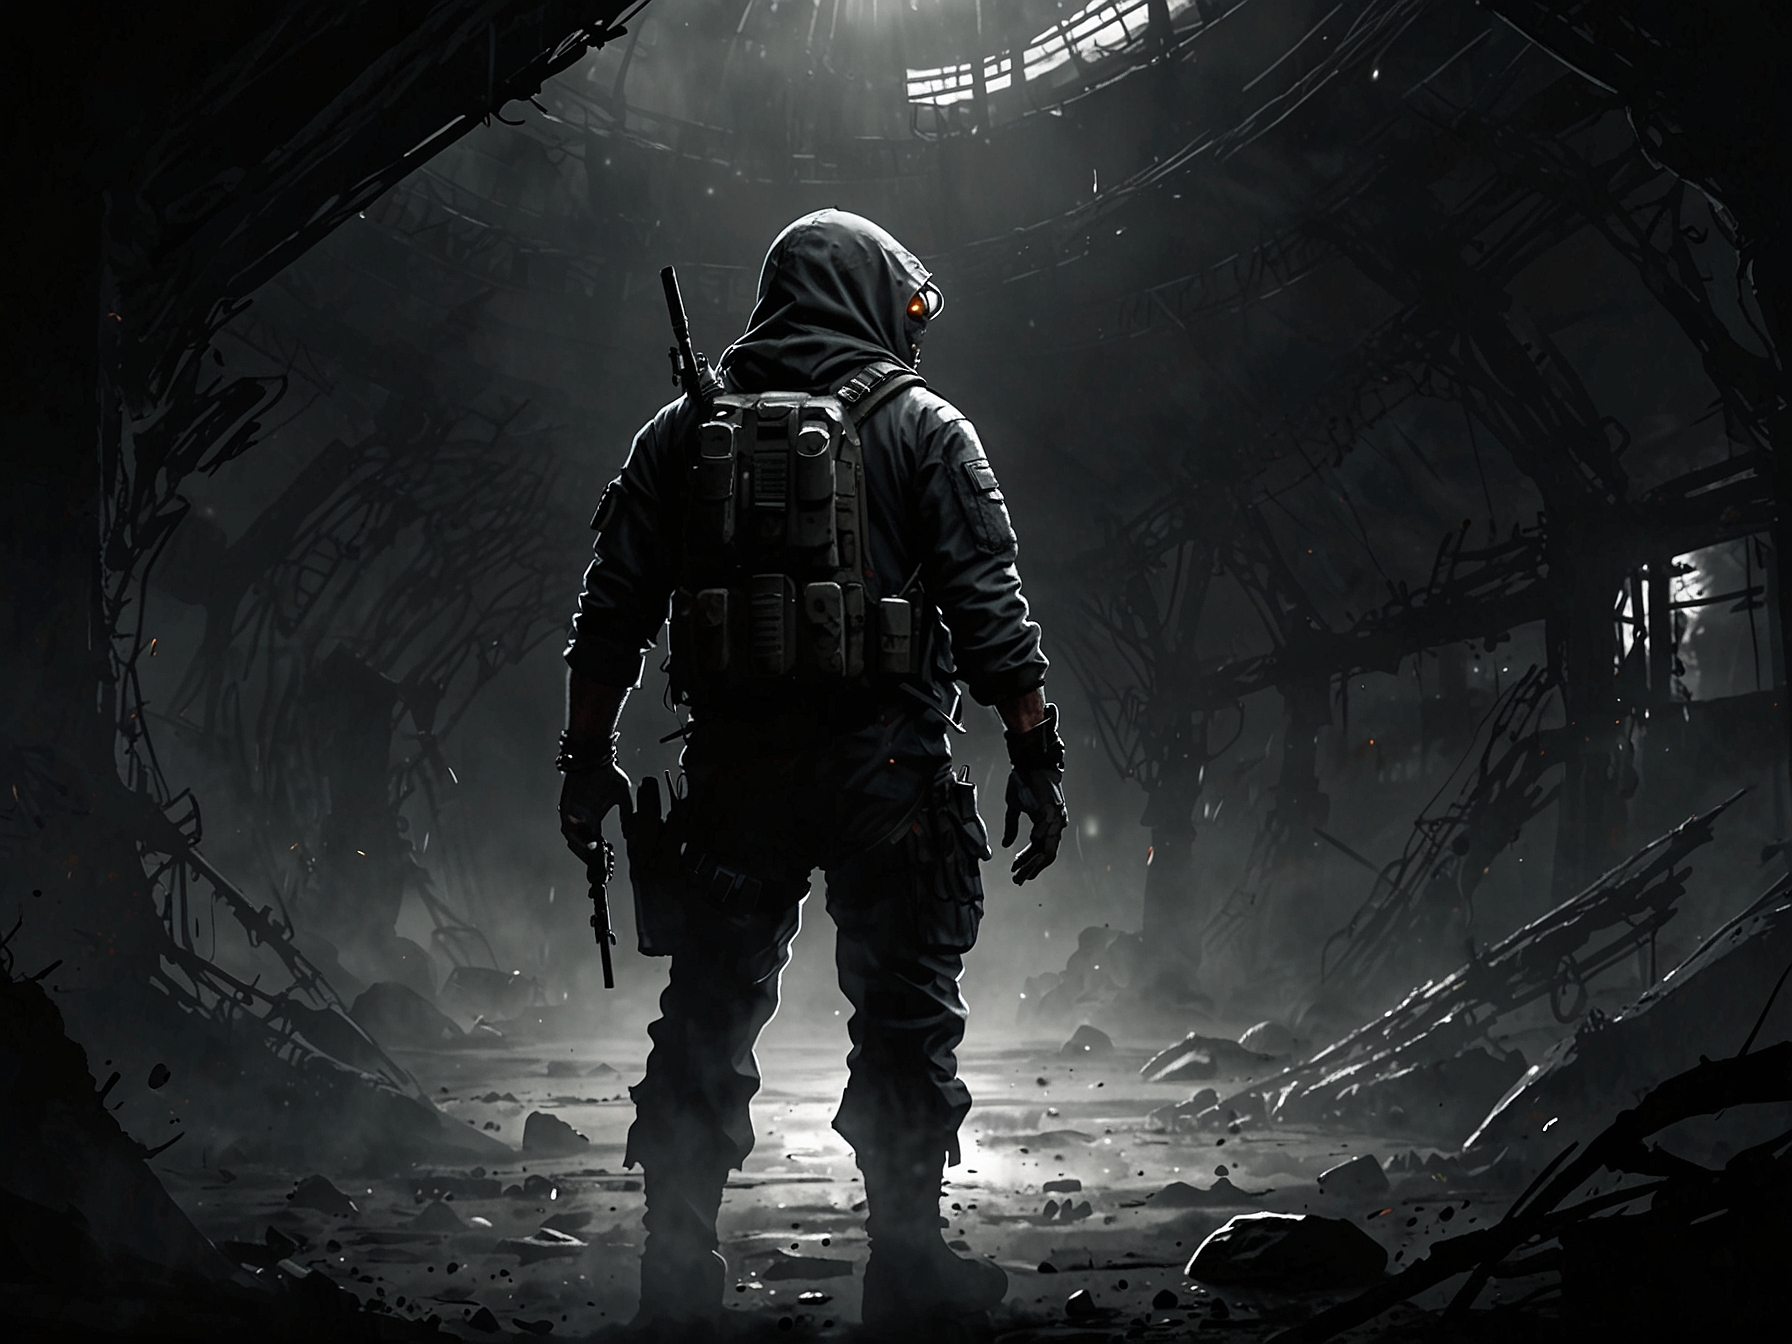 A player character stealthily navigating through a dark, post-apocalyptic setting, emphasizing the importance of silence and caution to avoid detection by extraterrestrial creatures.